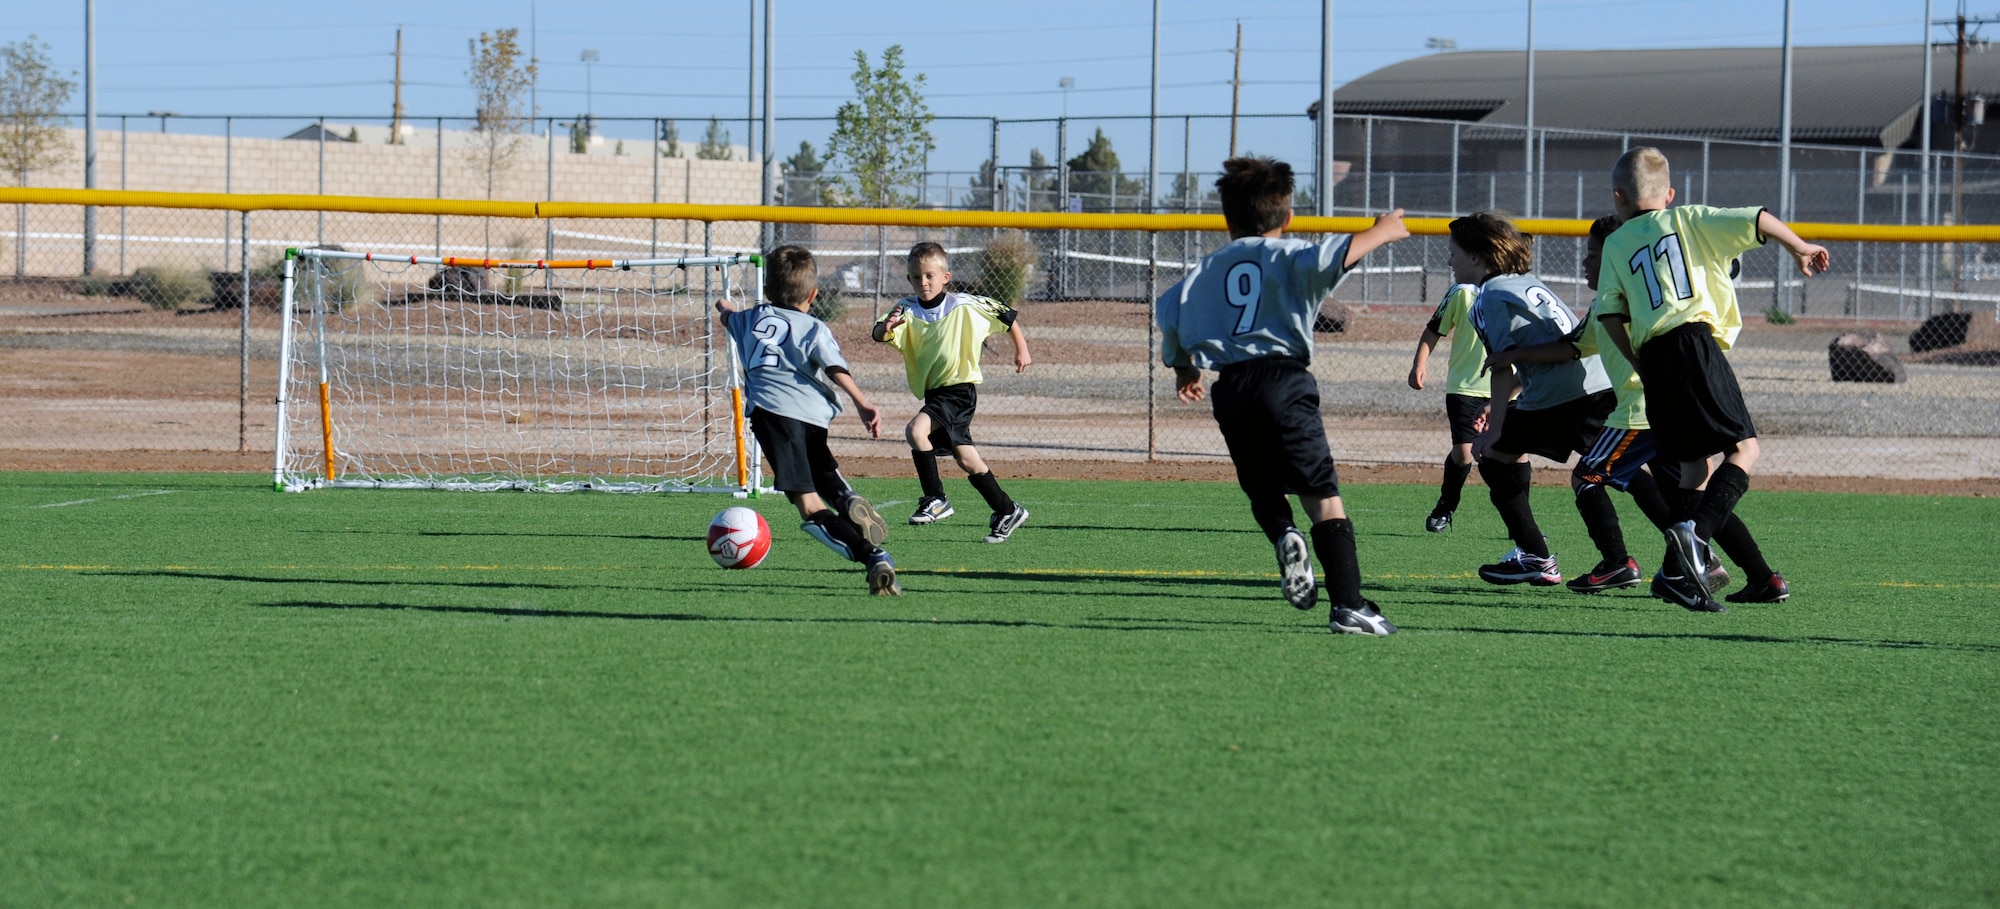 HOLLOMAN AIR FORCE BASE, N.M. -- Children in Holloman’s Youth Soccer League go after a ball Oct. 22, 2011, during a game at Johnson Field. Although the soccer league is only available to children five to twelve years old, the Holloman Youth Sports Program offers an instructional program that focuses on fundamentals of the sport for children three to five years old. (U.S. Air Force photo by Airman 1st Class Siuta B. Ika/Released)